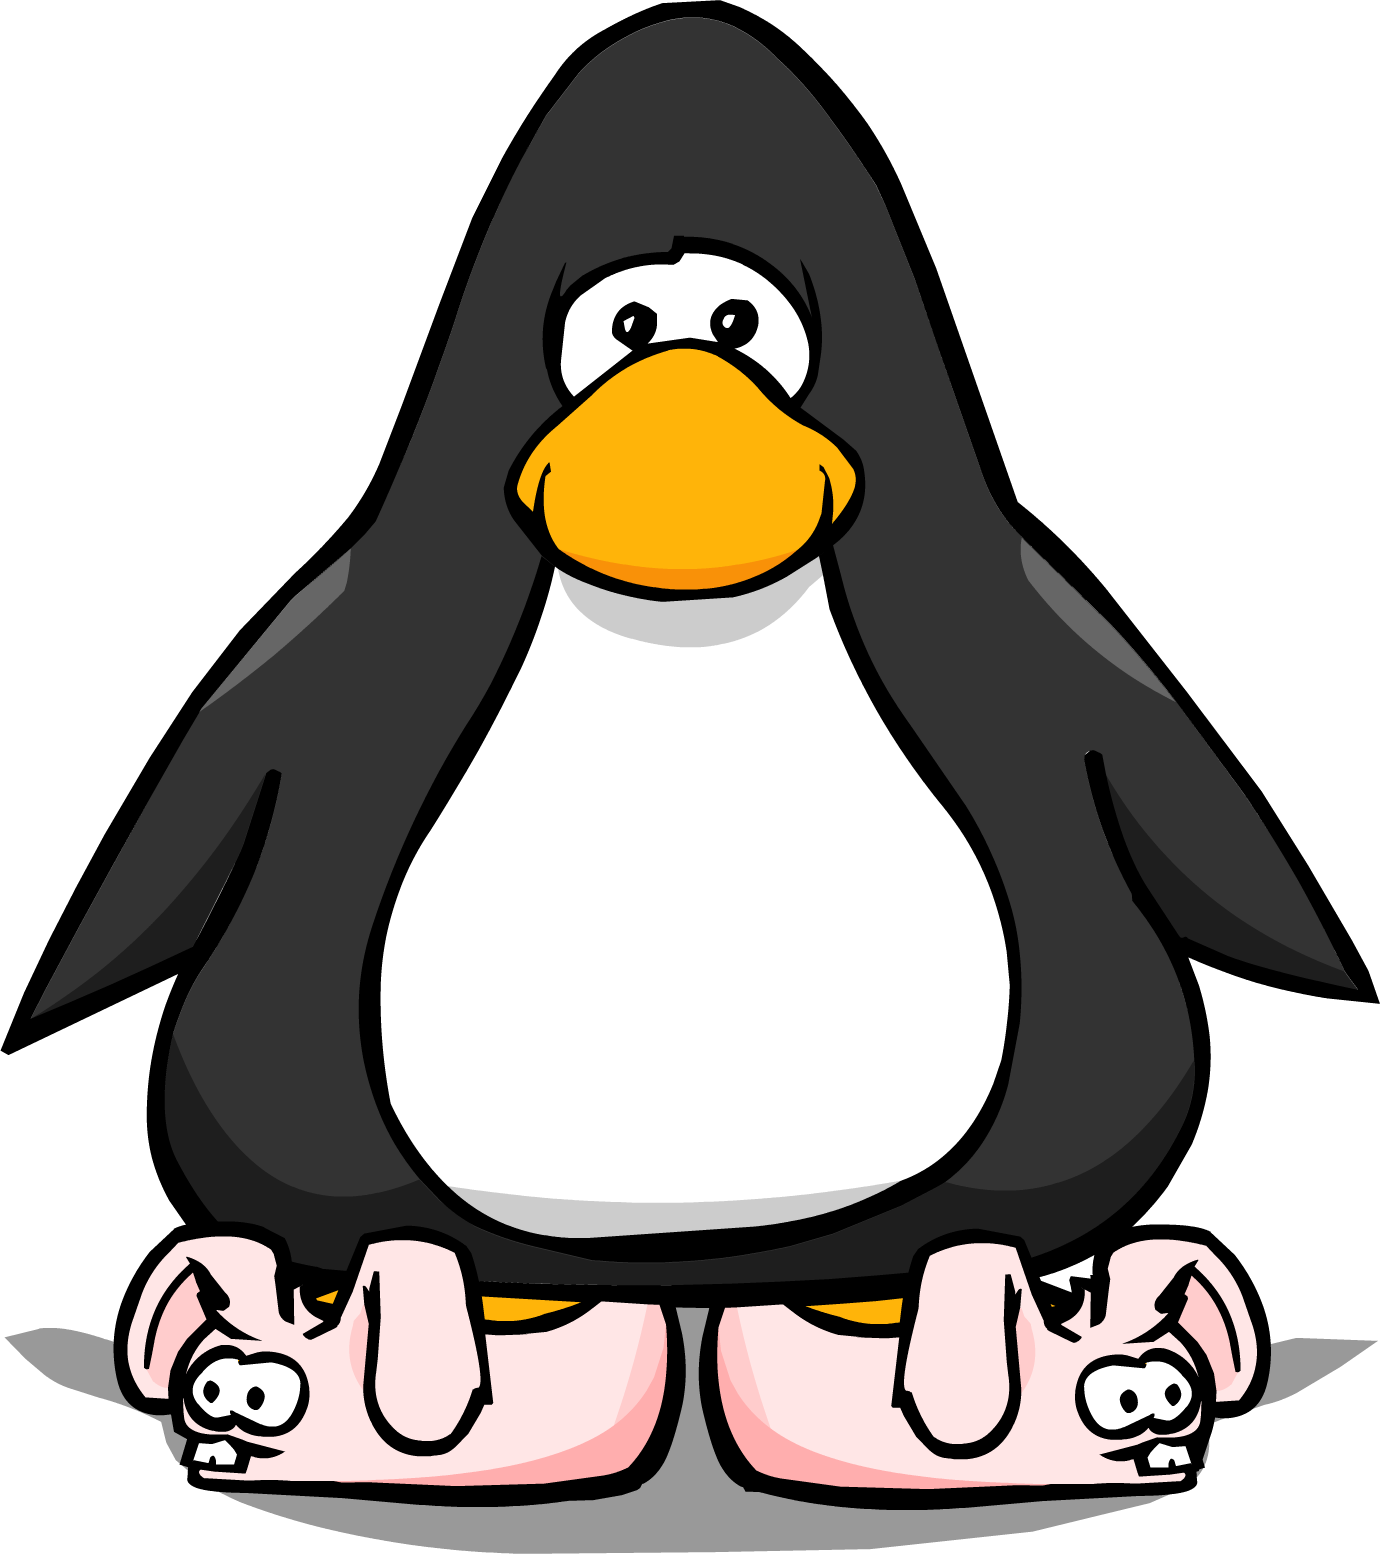 Bunny Slippers From A Player Card - Club Penguin Vampire Fangs (1415x1554)